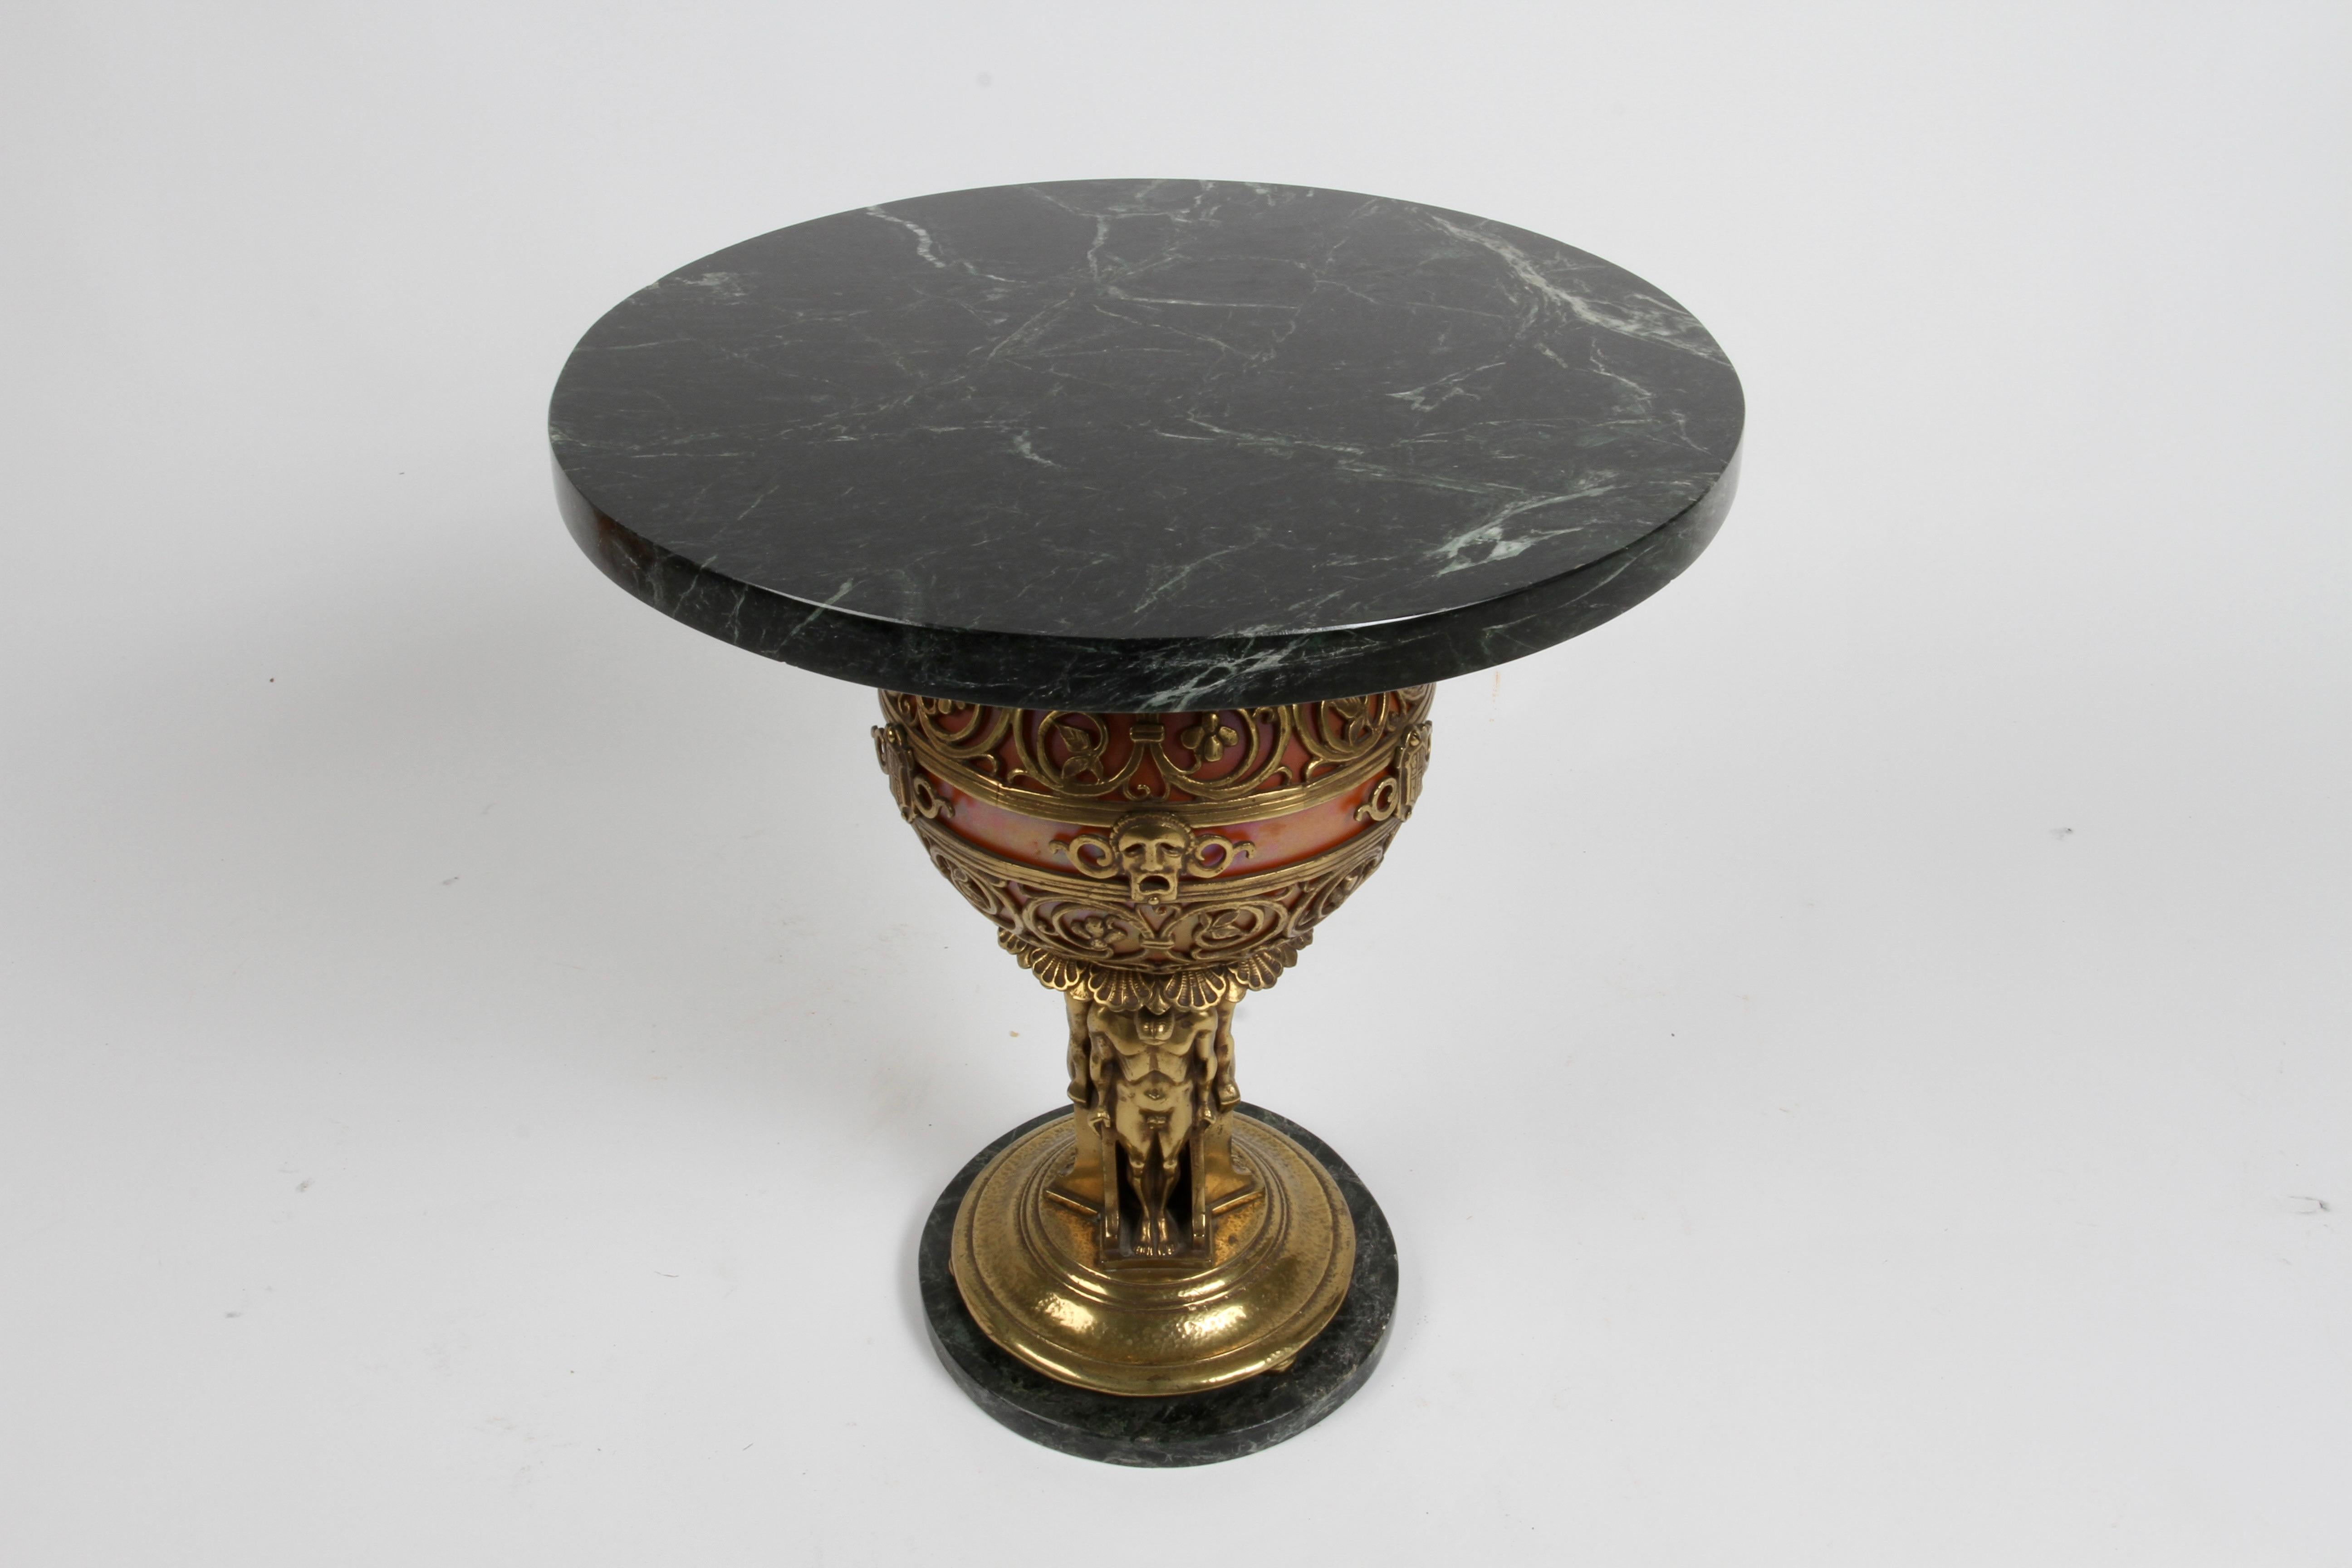 Impressive Art Deco designed Oscar Bach round occasional, side or end table with a Empress Green marble top plus base and bronze lamp base with original Steuben glass globe. This is possibly unique, a custom order, or possible a 70 year plus